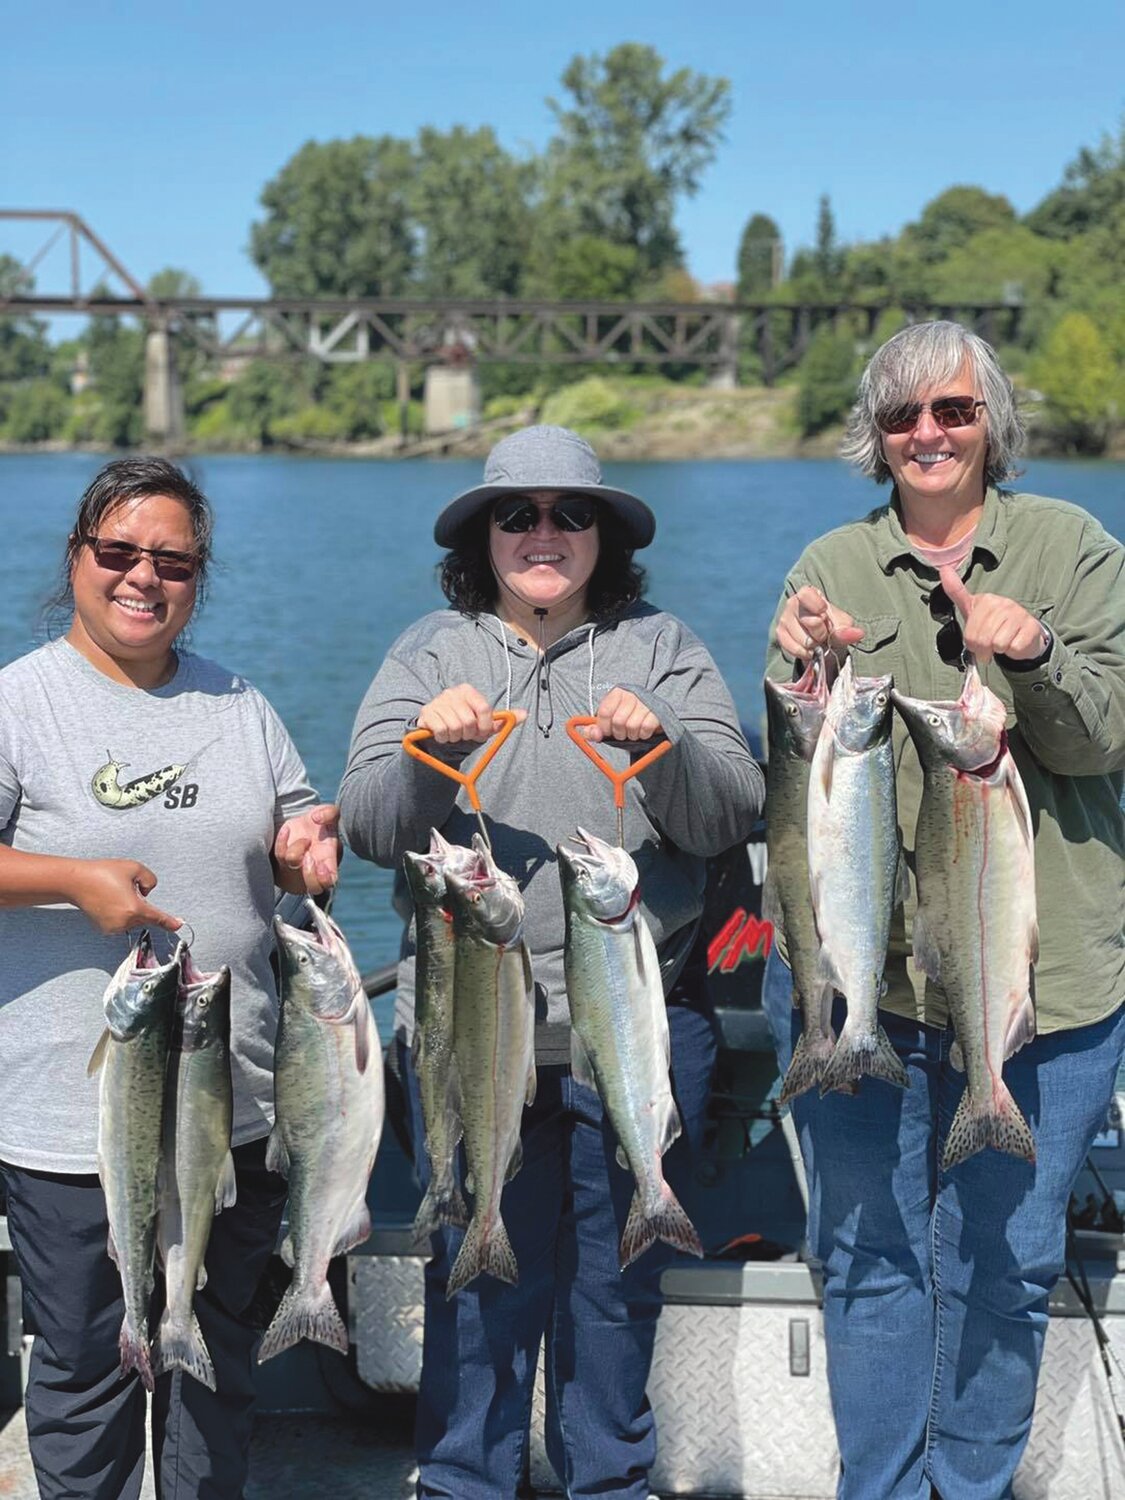 Pink salmon caught on the Snohomish River.
Courtesy Brianna Bruce, Livin’ Life Adventures